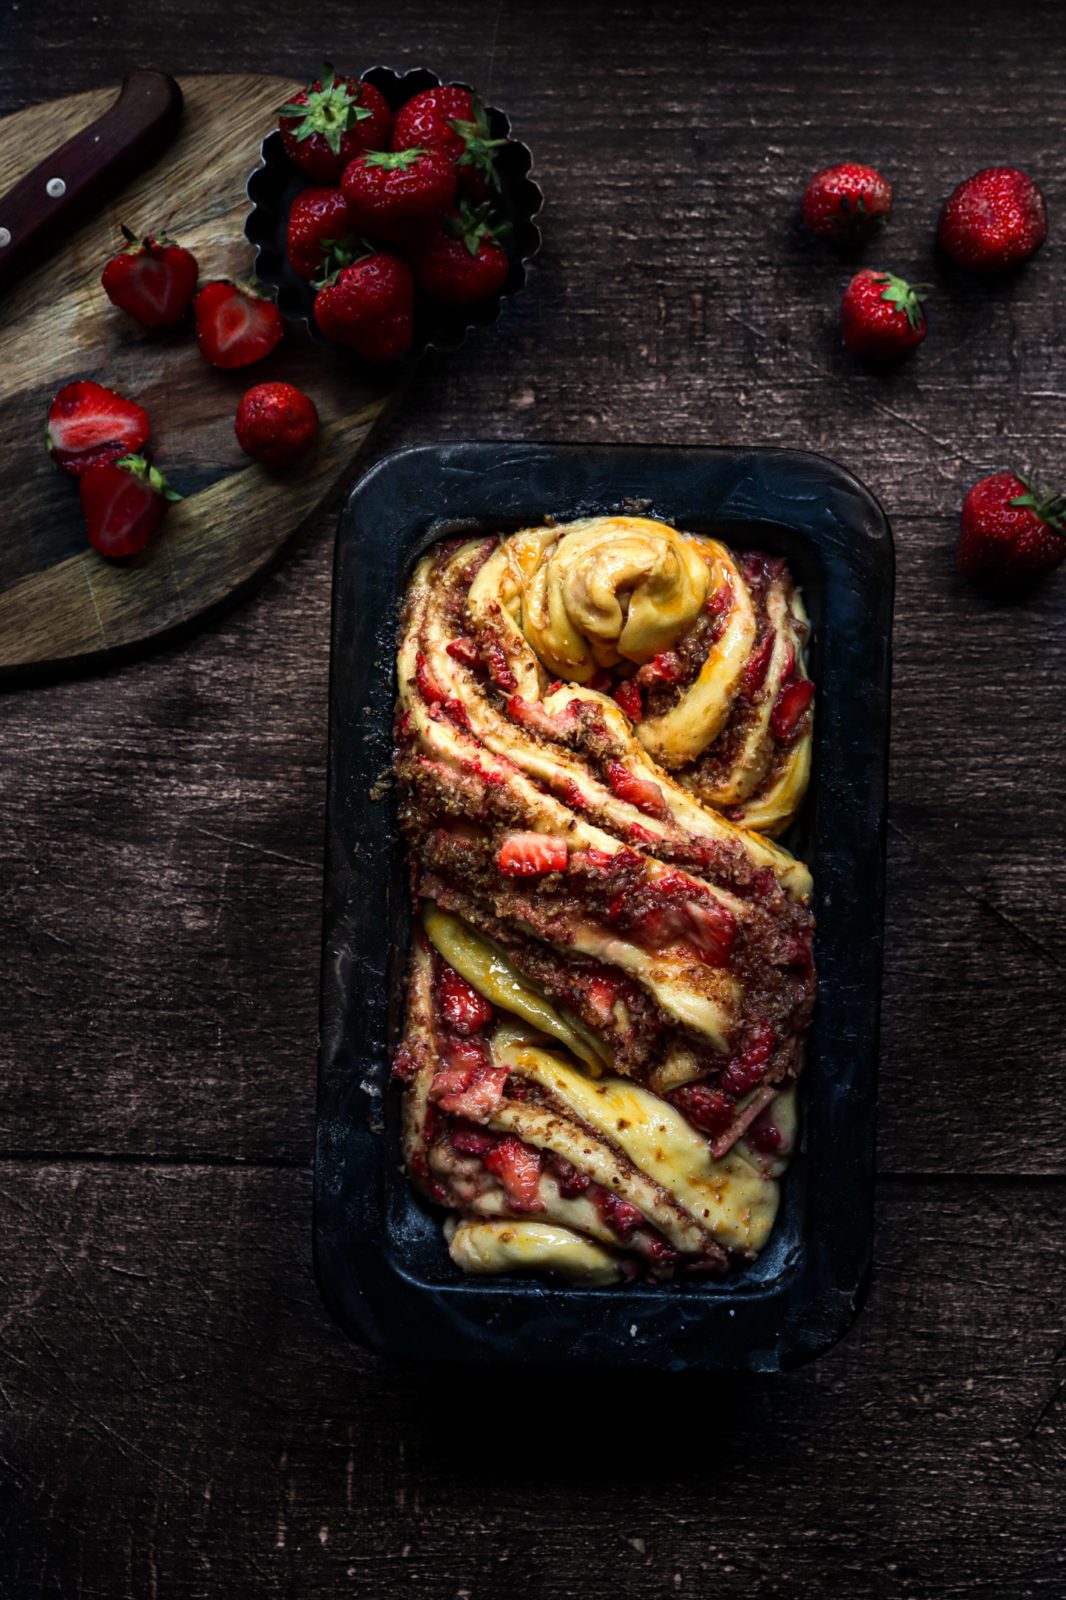 Saffron brioche babka filled with fresh strawberries and coconut and cardamom